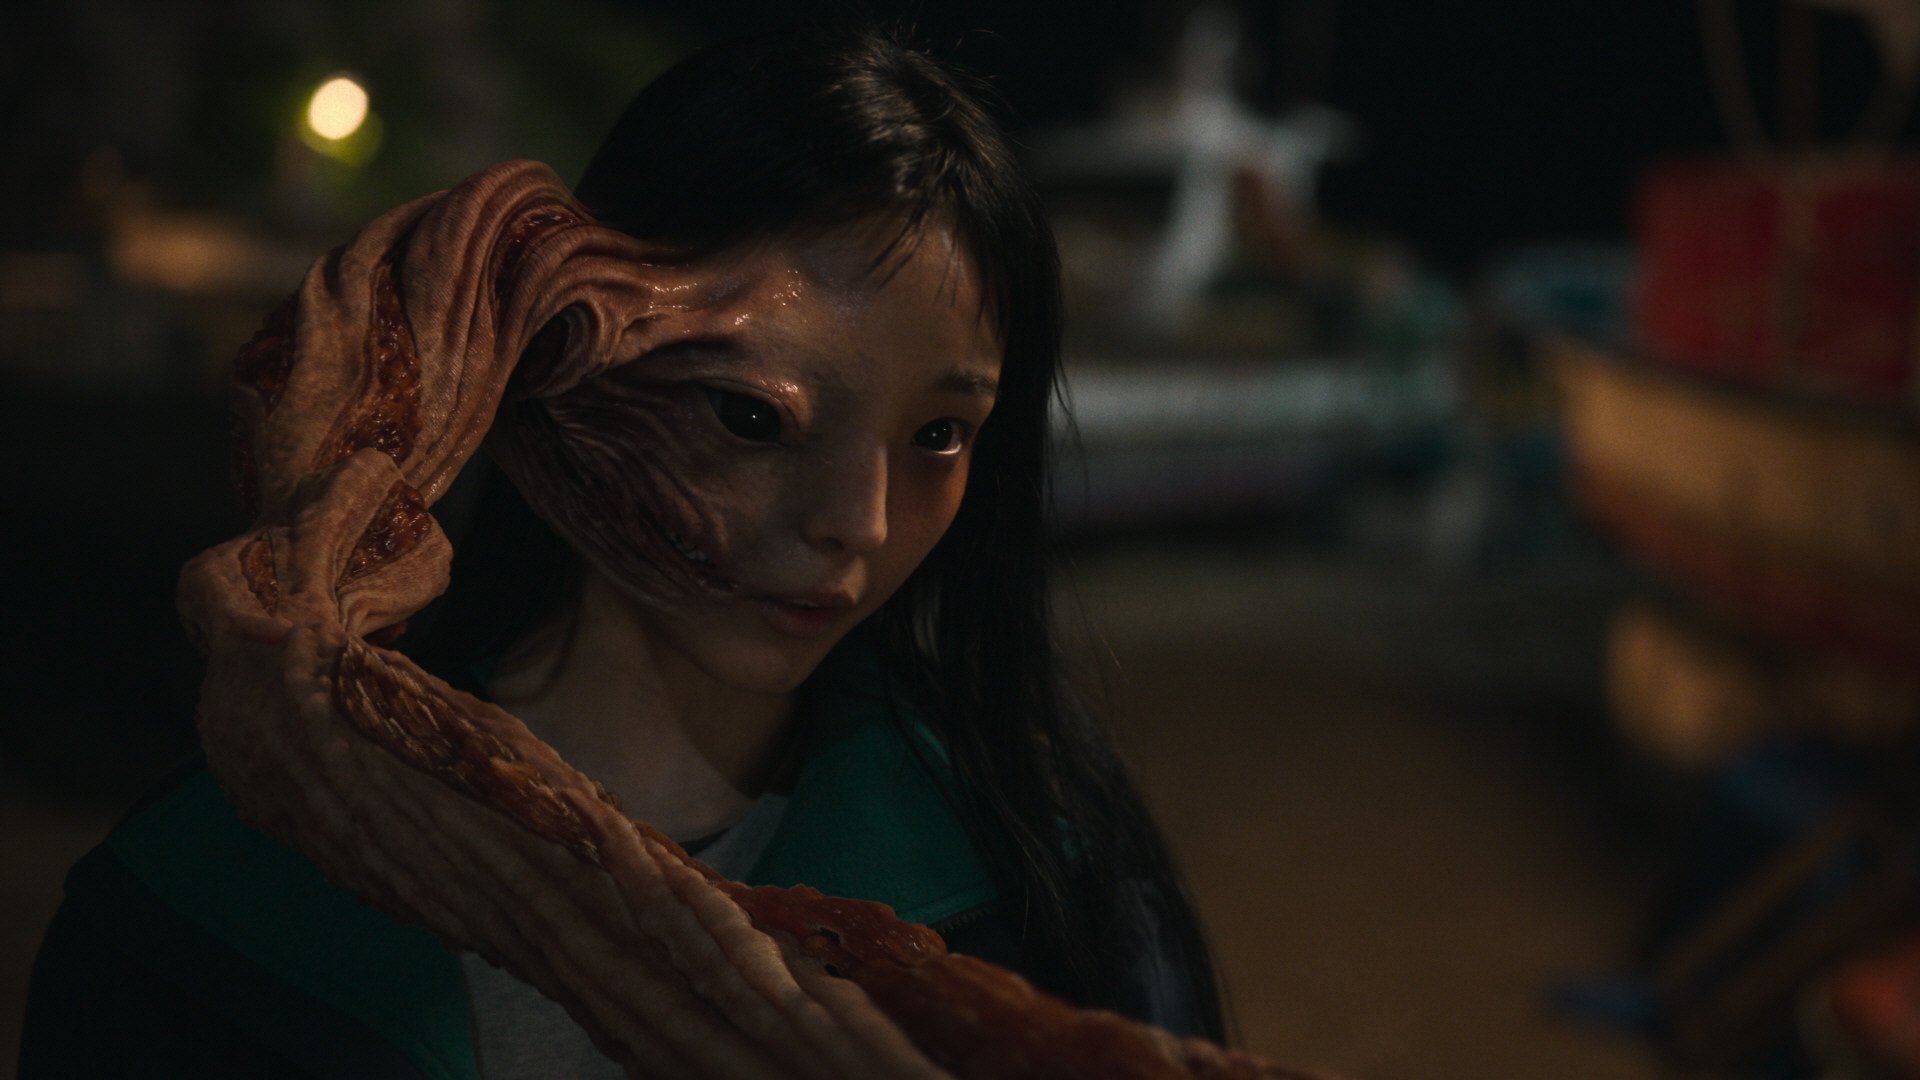 Jeon So-nee as Jeong Su-in in a still from Parasyte: The Grey. Photo: Cho Wonjin/Netflix